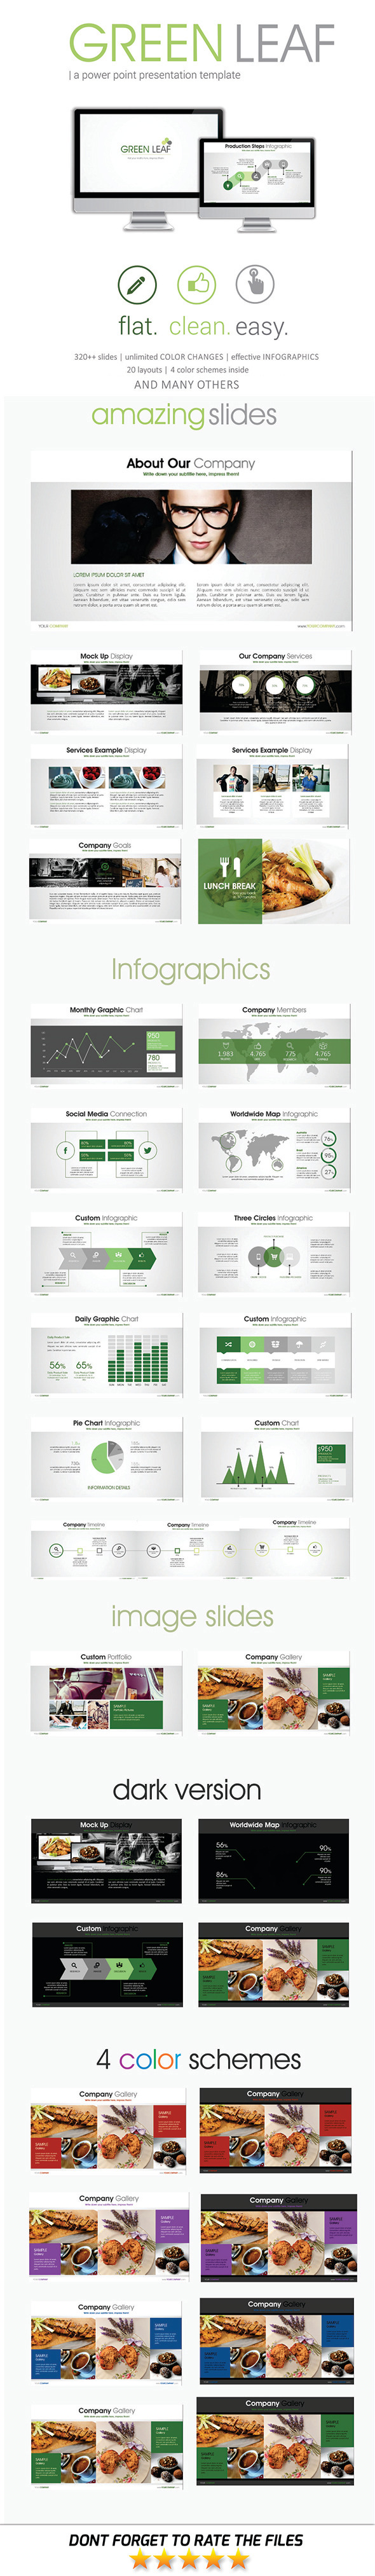 Green Leaf PowerPoint Template